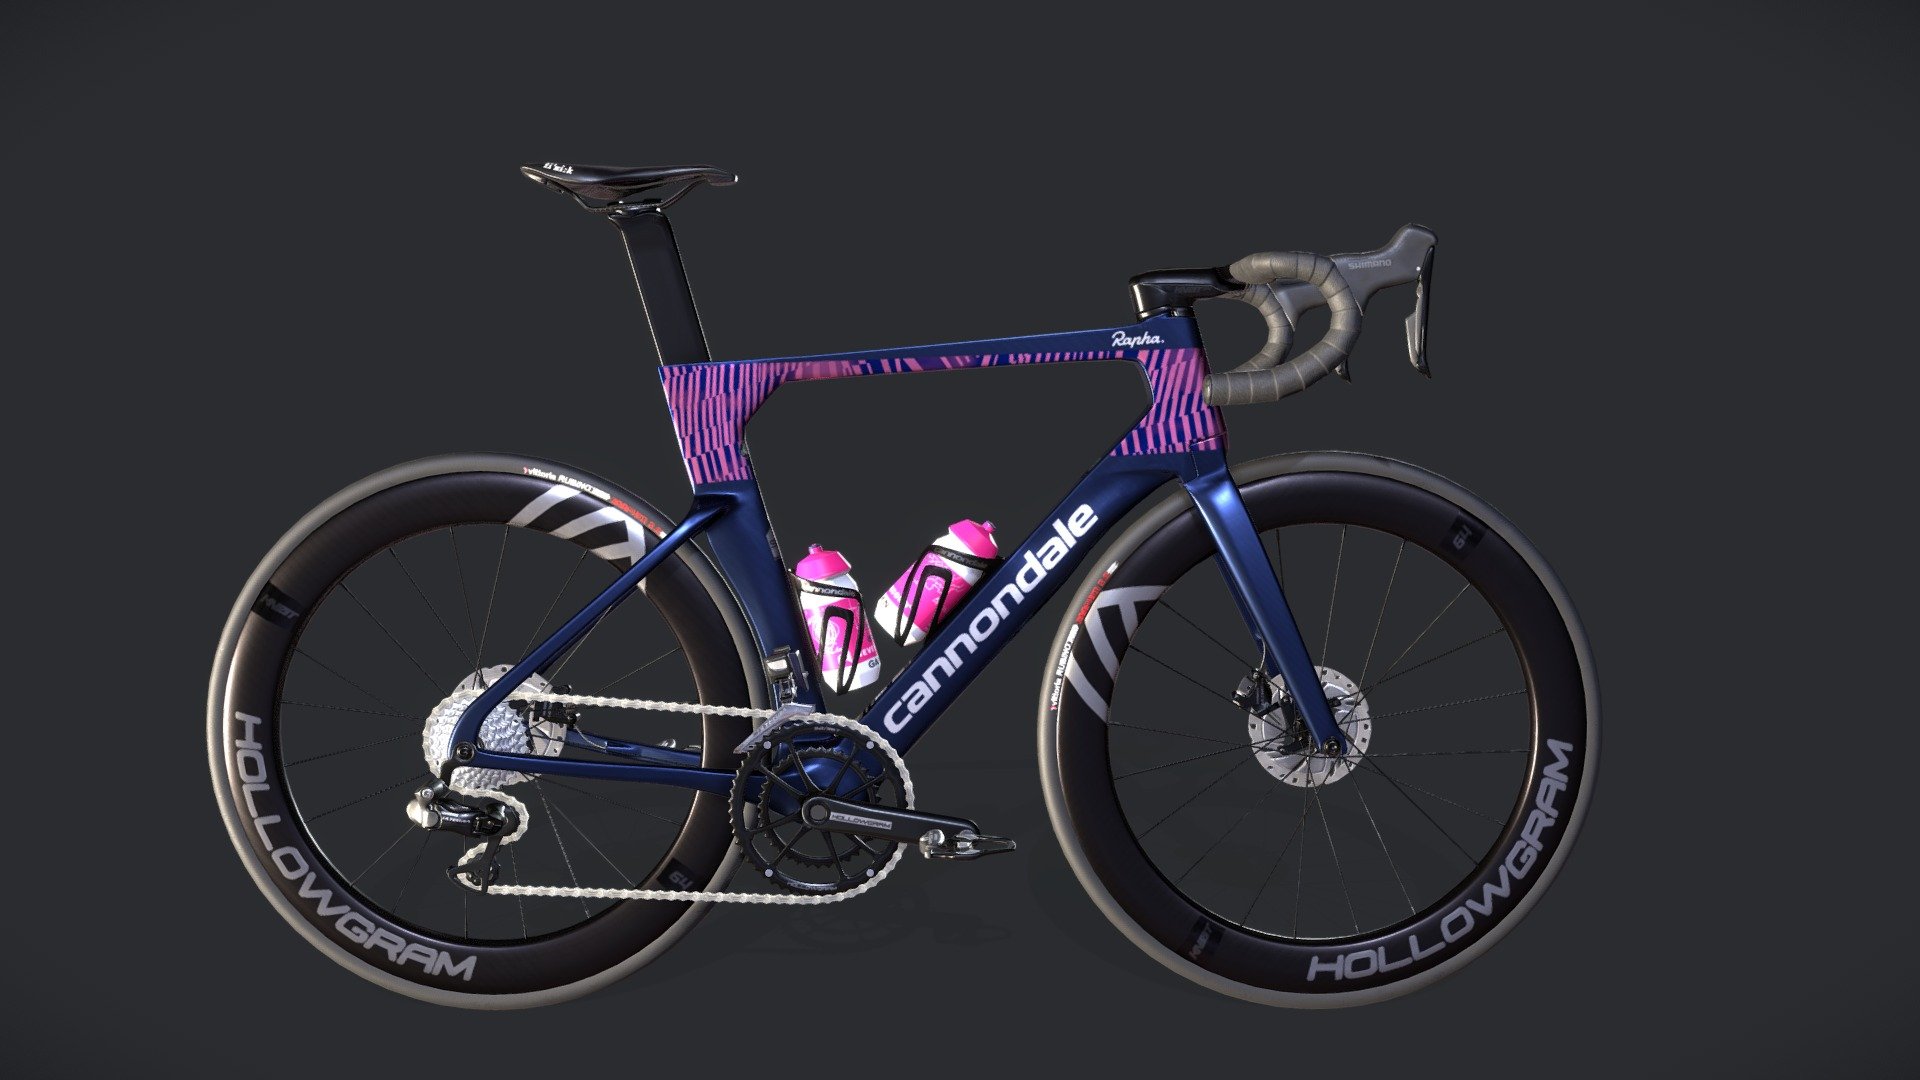 The Cannondale SystemSix Bike with Hi-MOD Carbon and Ultegra Di2 components model made entirely in Blender
EF EDUCATION - NIPPO PROCYCLING TEAM BICYCLE.

Model consist of two 4k PBR texture sets of:
-base color
-ambient occlussion
-roughness
-metalness
-normals
-height
-emissive
-opacity
Whole bike consist of 65 objects (not marged)
UVs mostly do not overlap and they are not flipped.
~100k vertises, 
~100k polys - The Cannondale SystemSix Bike - Buy Royalty Free 3D model by Dav1d- 3d model